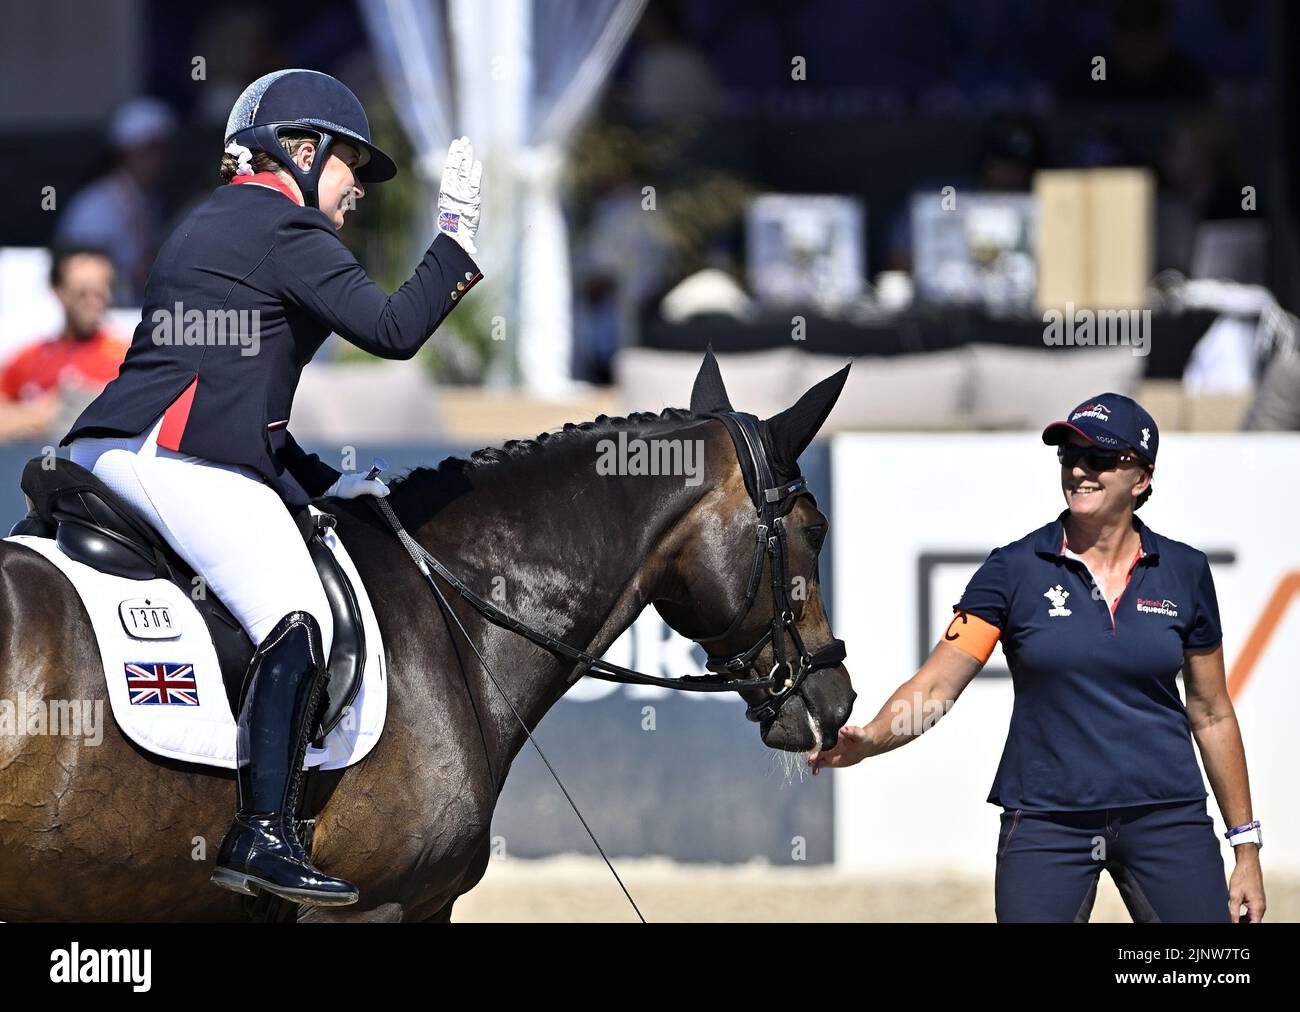 Herning. Denmark. 13 August 2022. World Equestrian Games.Natasha Baker (GBR) riding KEYSTONE DAWN CHORUS celebrates at the end of her test in the FEI Para Dressage Team championships - Grade III. Stock Photo